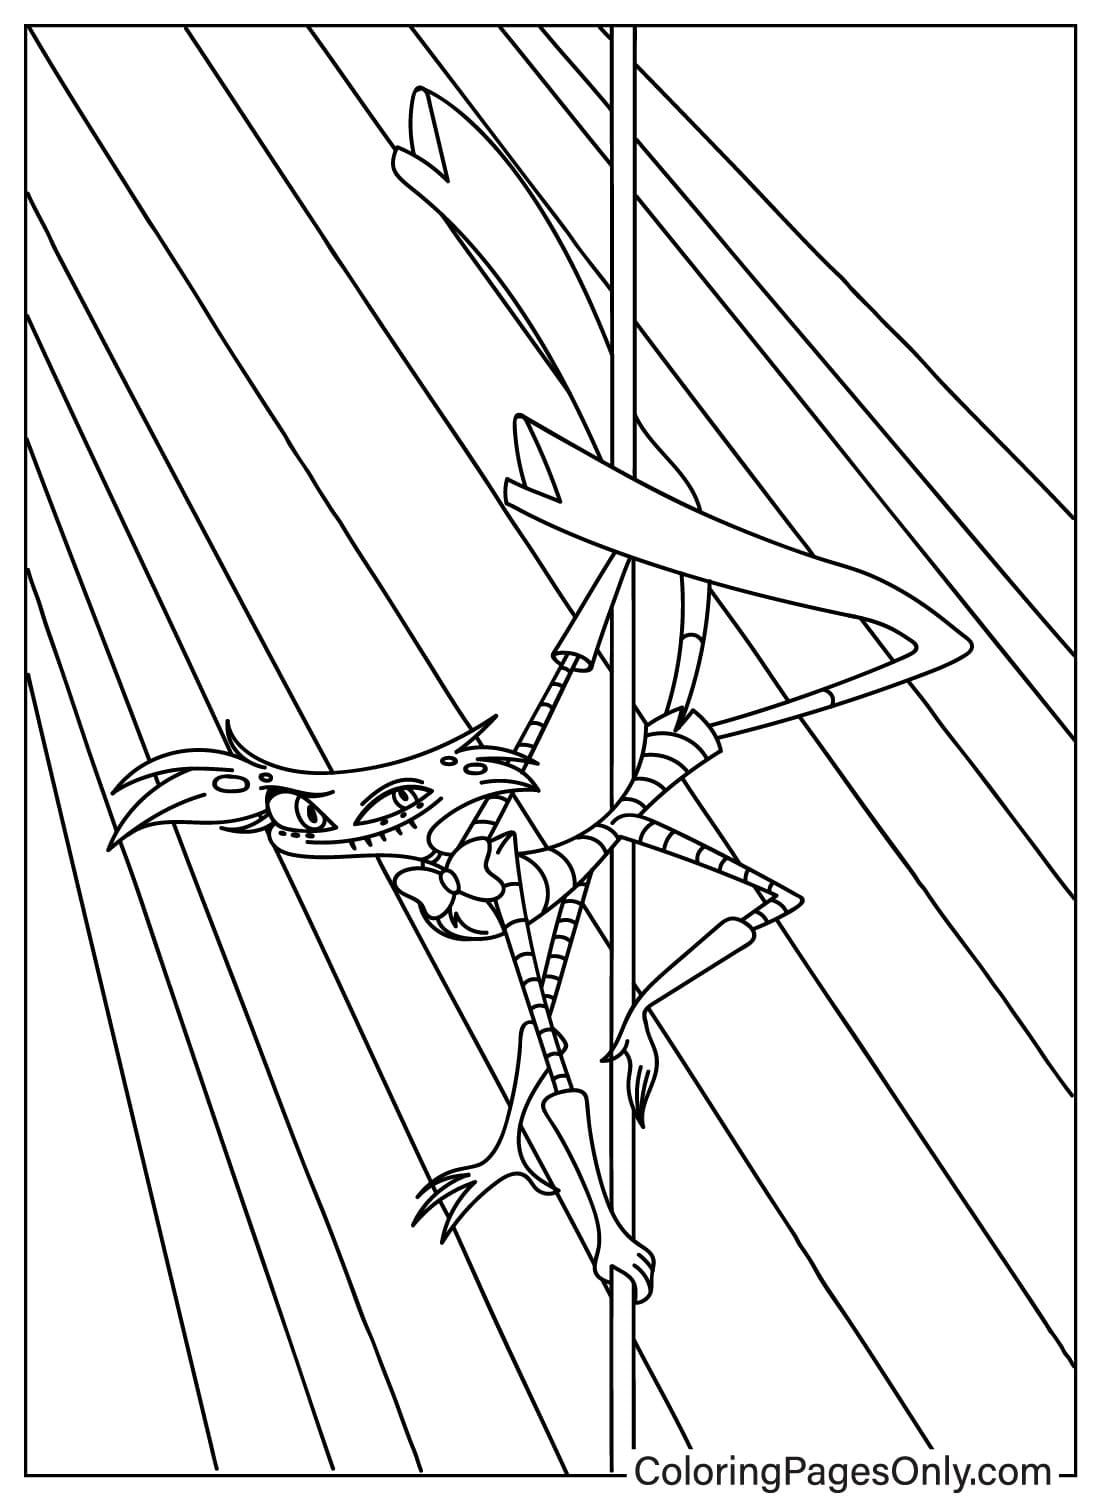 Angel Dust Pole Dancing Coloring Page from Angel Dust